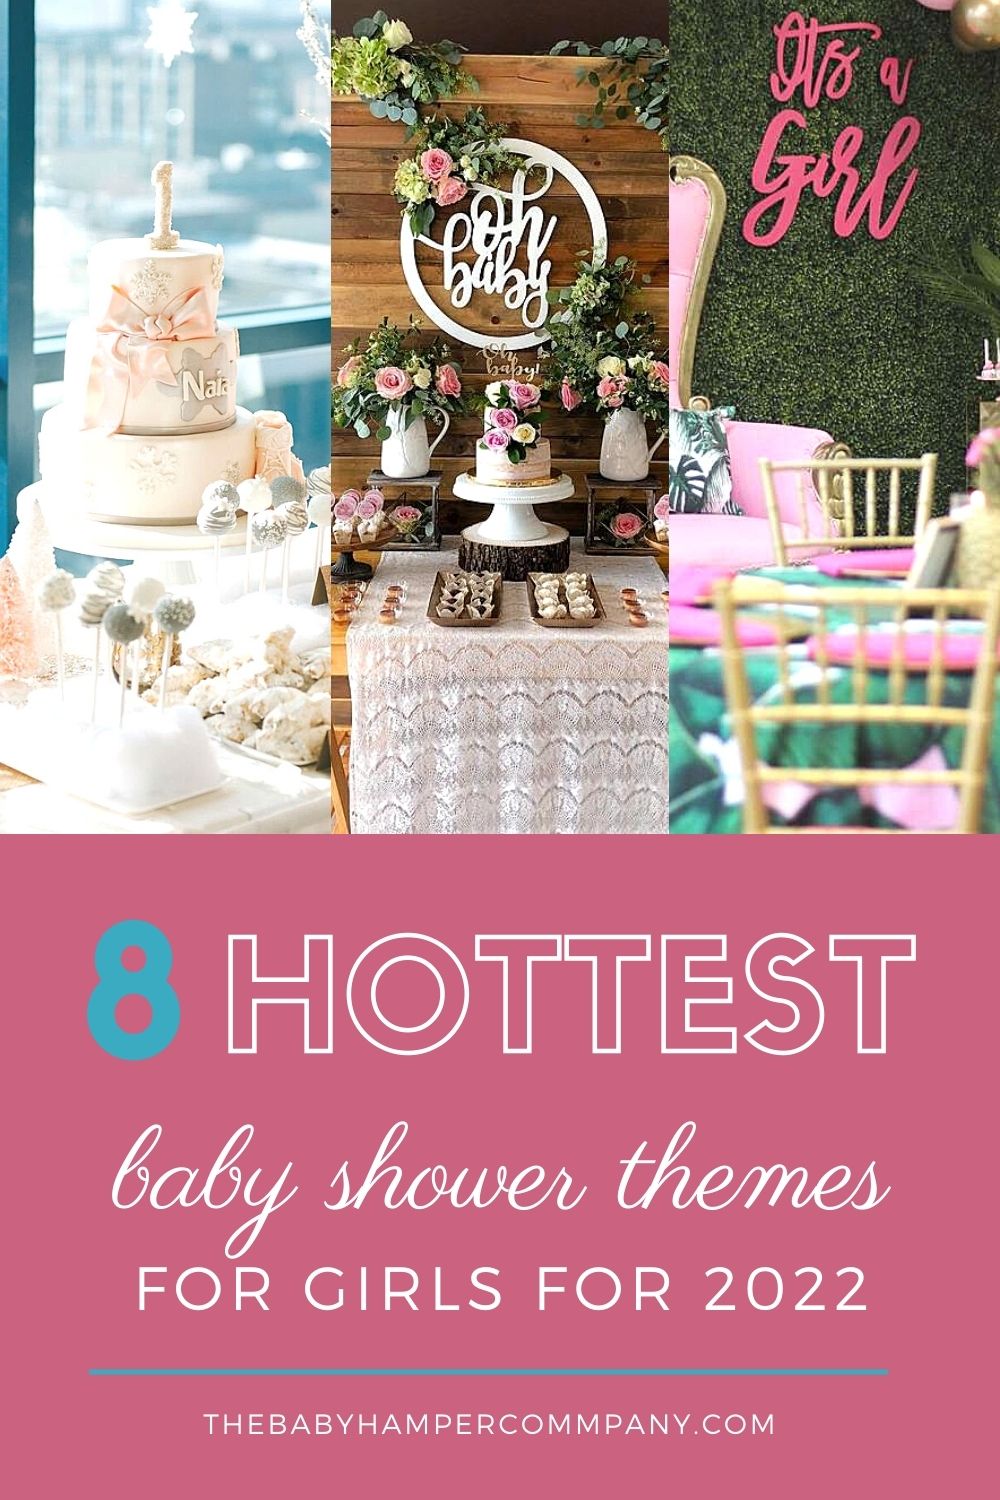 8 Hottest Baby Shower Themes For Girls For 2022 – The Baby Hamper Company